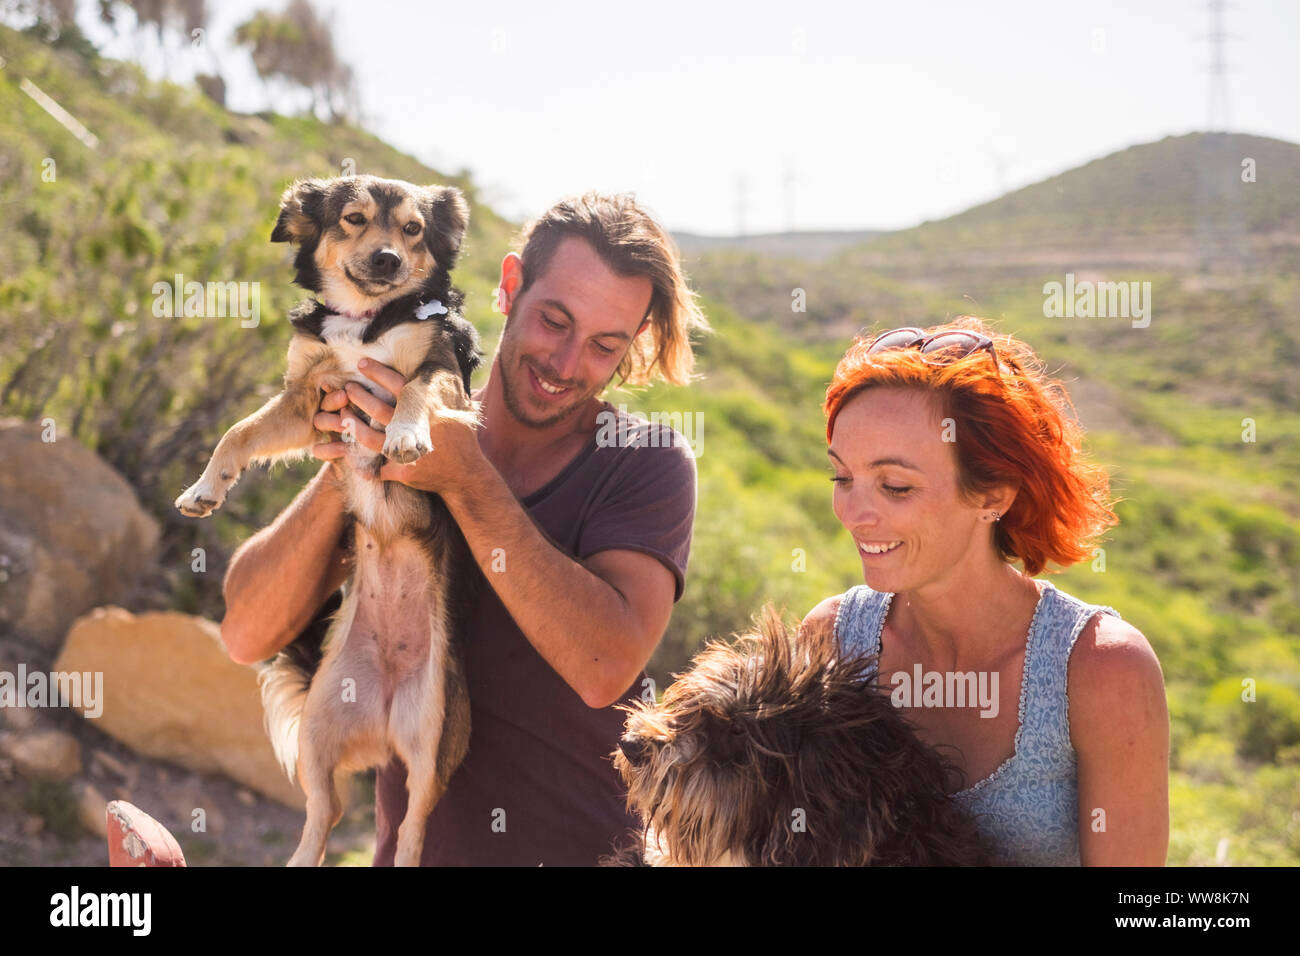 alternative outdoor living lifestyle family and couple in friendship and relationshp have fun with their two dogs. happiness together in outdoor leisure activity. nature country side Stock Photo